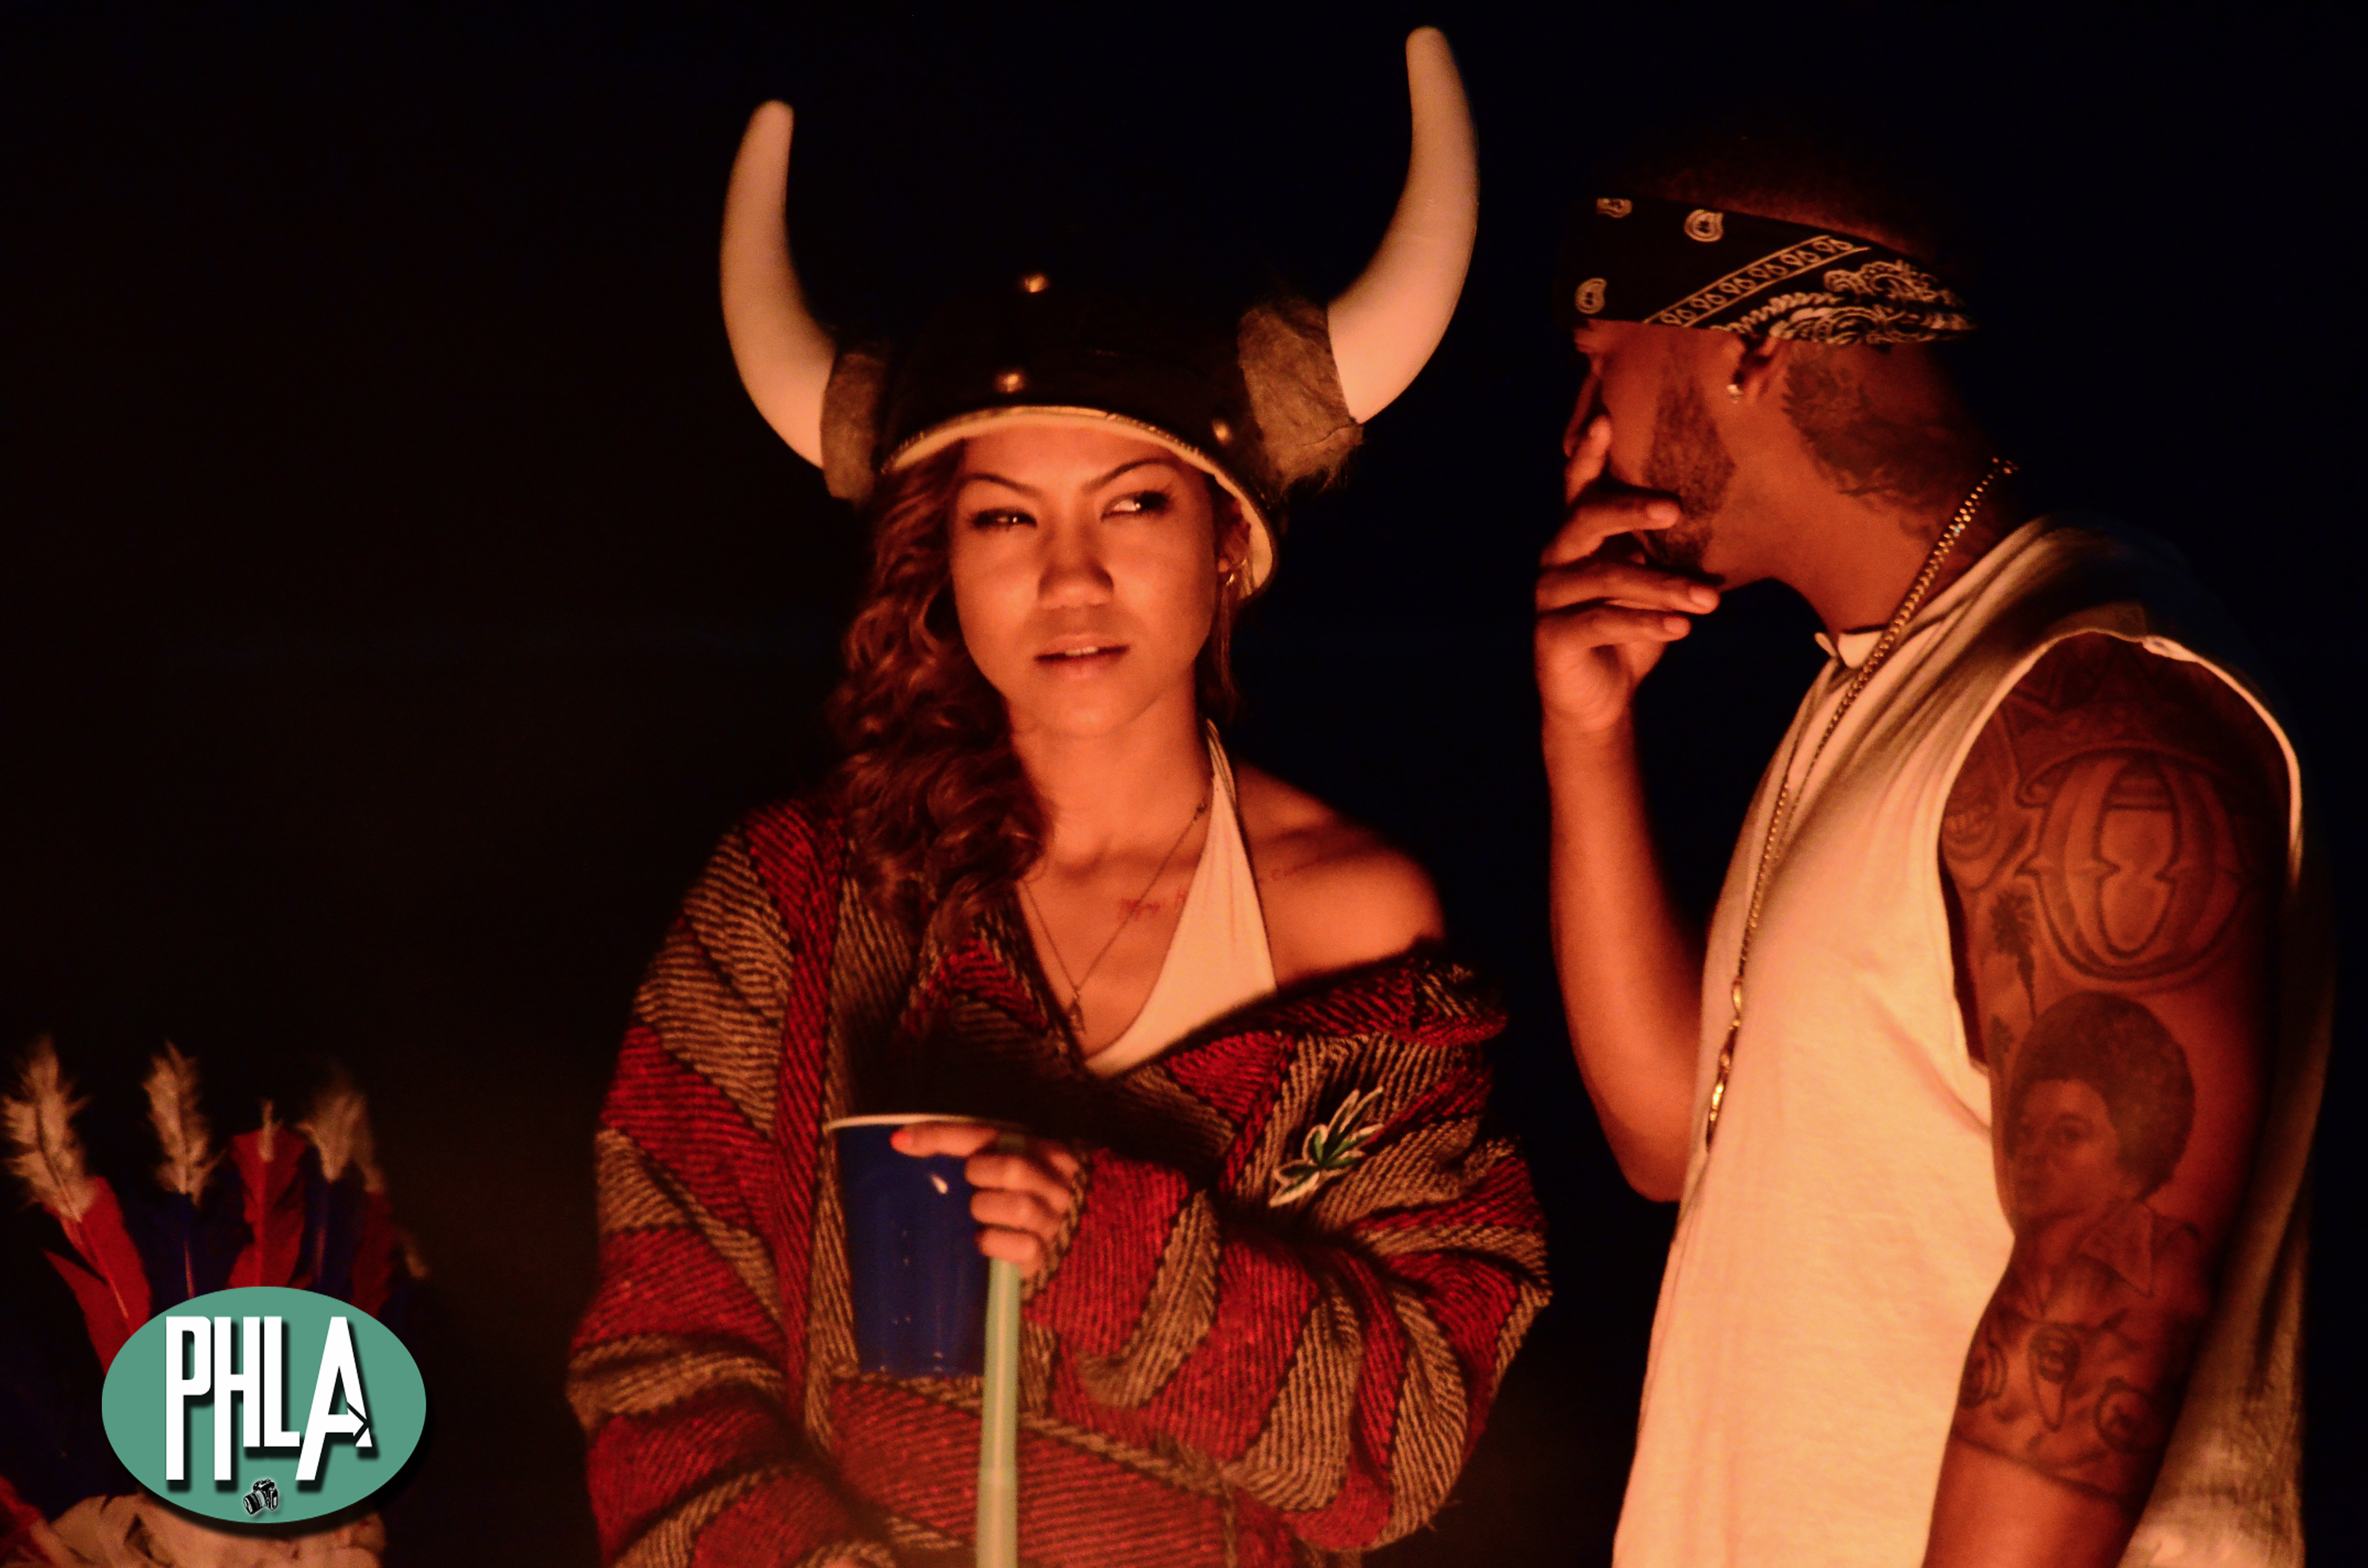 Jhene Aiko On The Set Of “Burning Man” Video (Pictures)